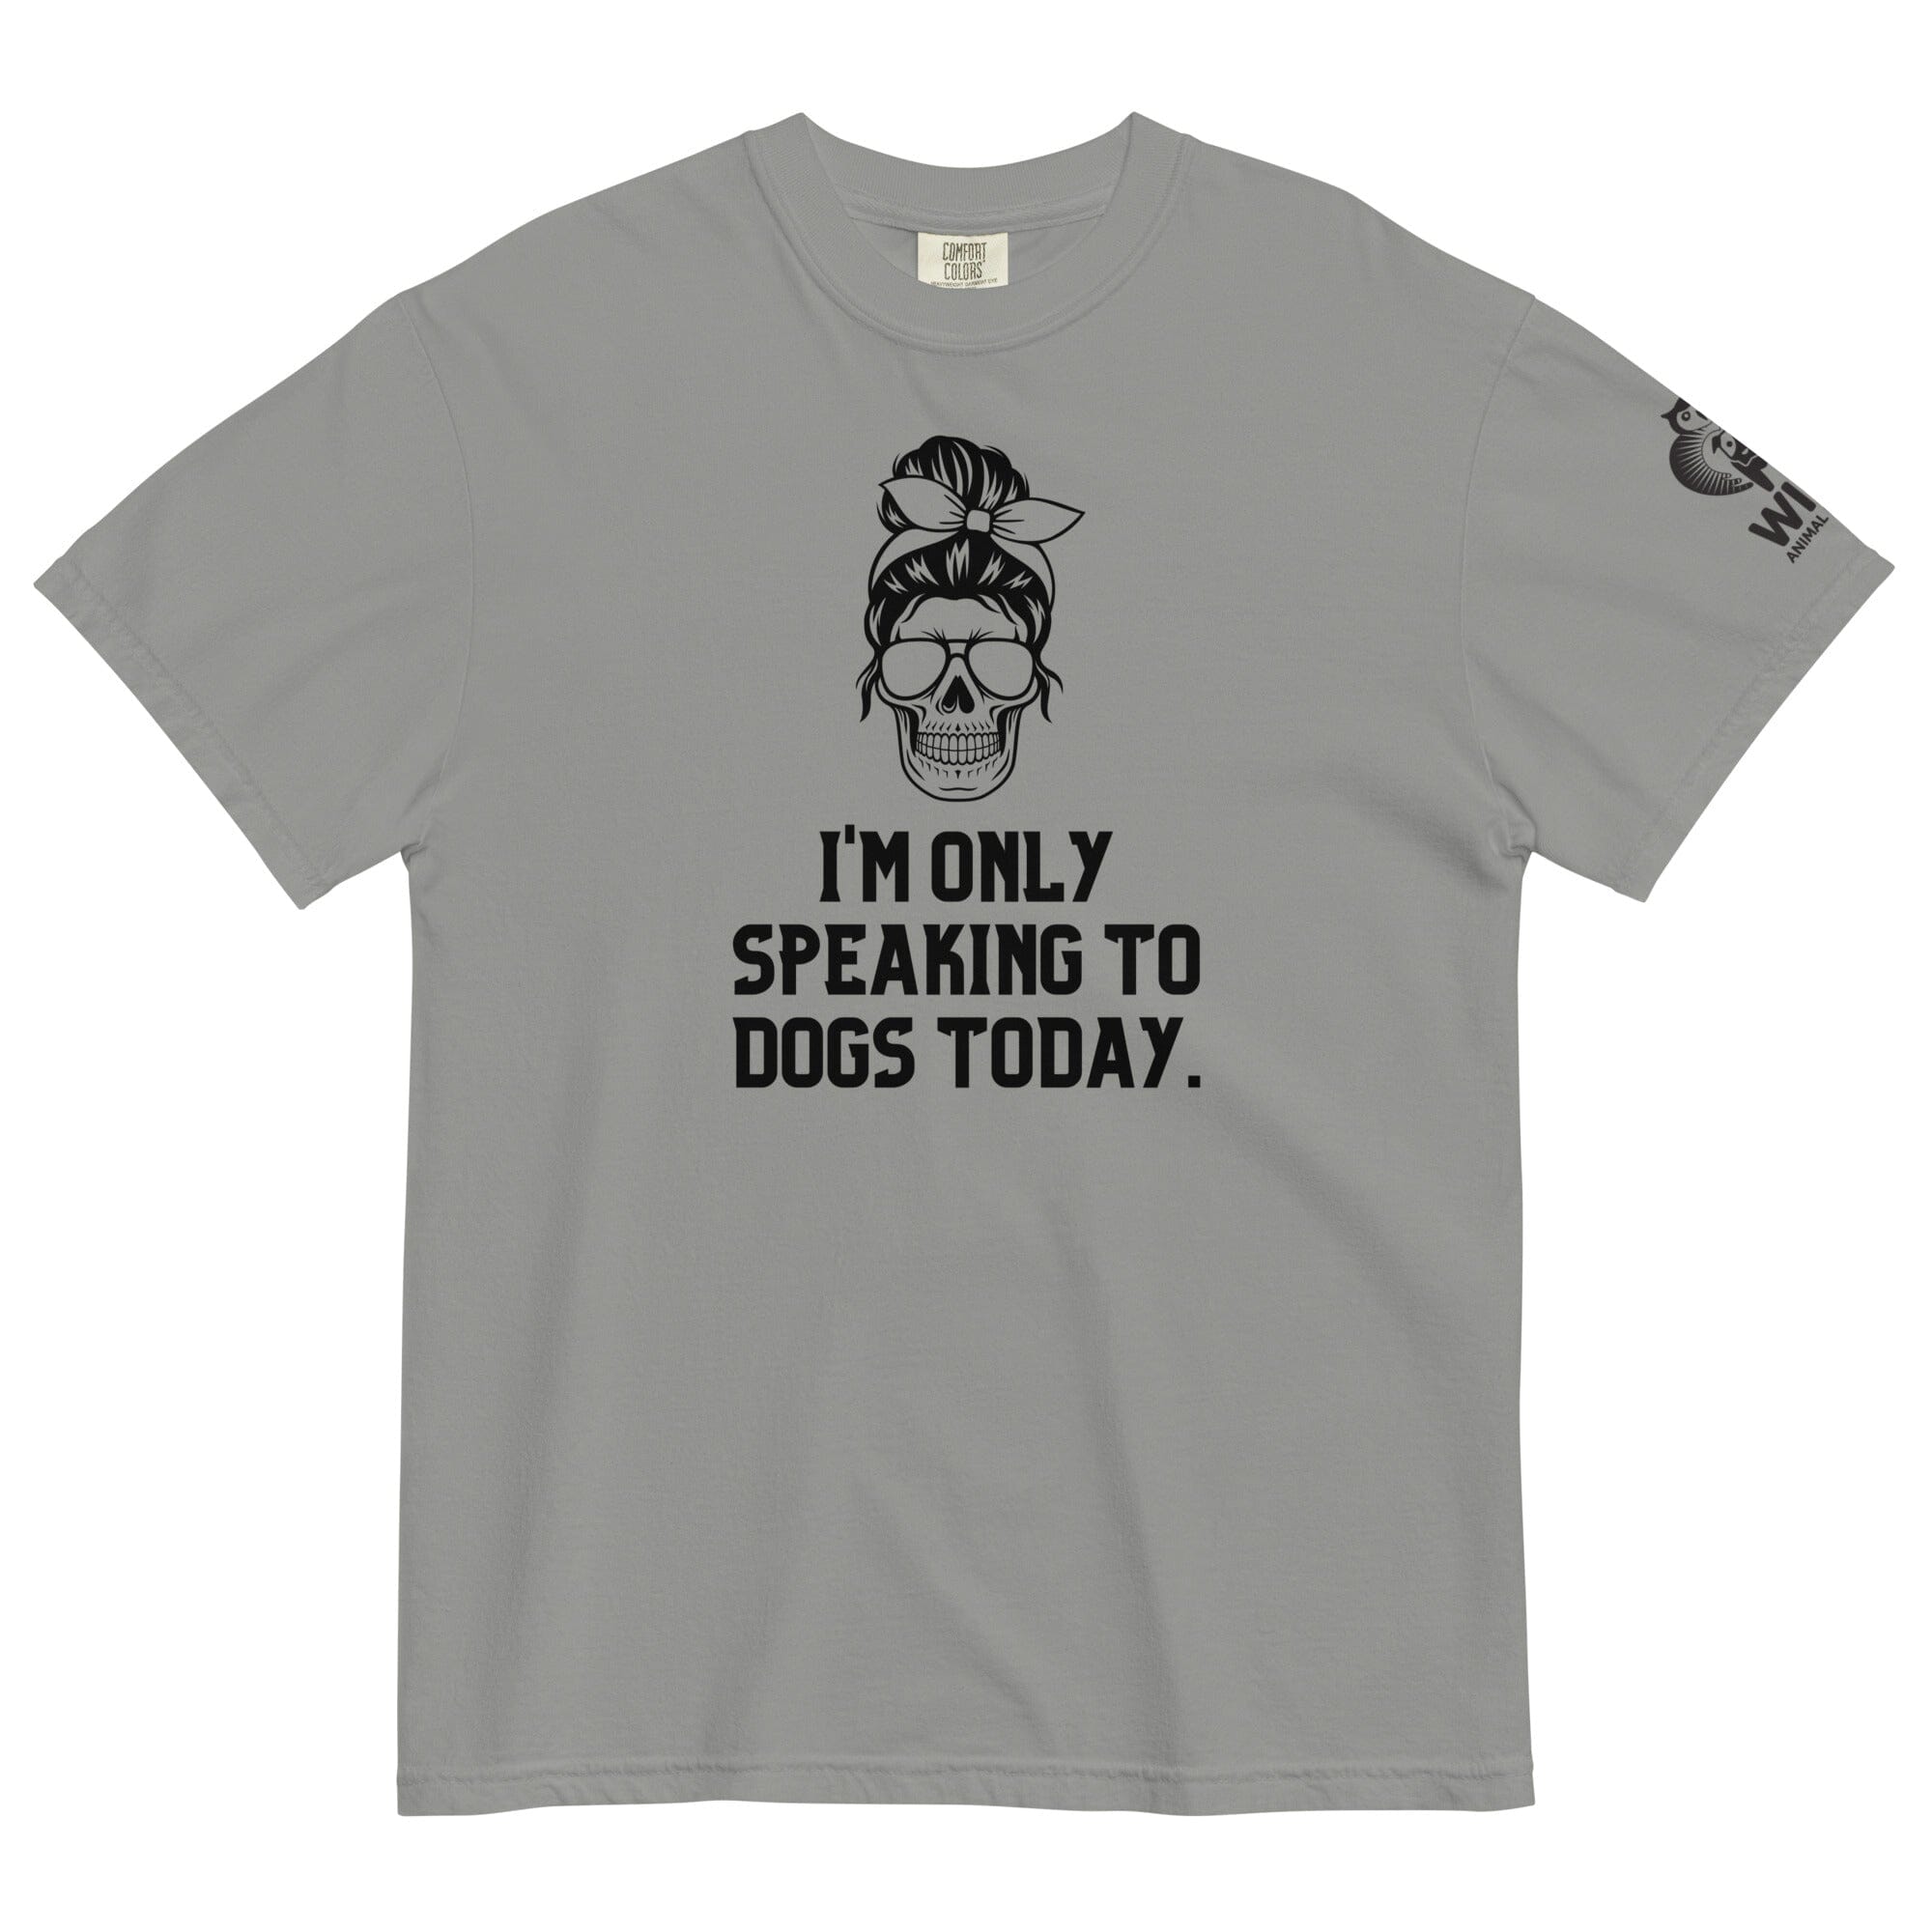 ONLY SPEAKING WISE ANIMAL RESCUE UNI T (PIGMENT DYED)